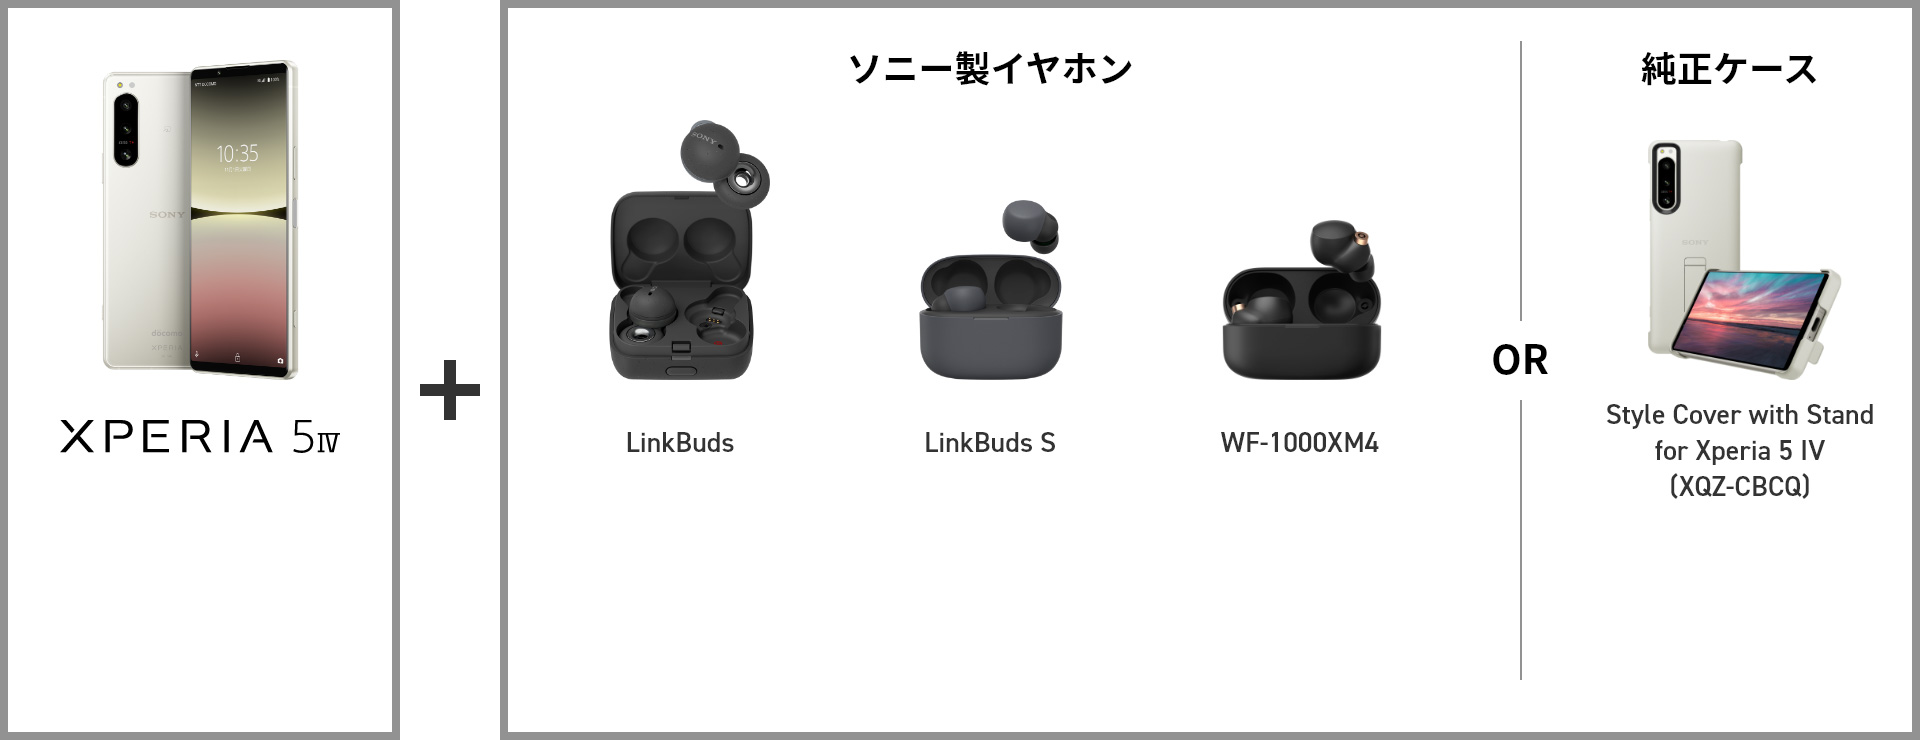 Xperia 5 IV + ソニー製イヤホン LinkBuds / LinkBuds S / WF-1000XM4 OR 純正ケース Style Cover with Stand for Xperia 5 IV (XQZ-CBCCQ)